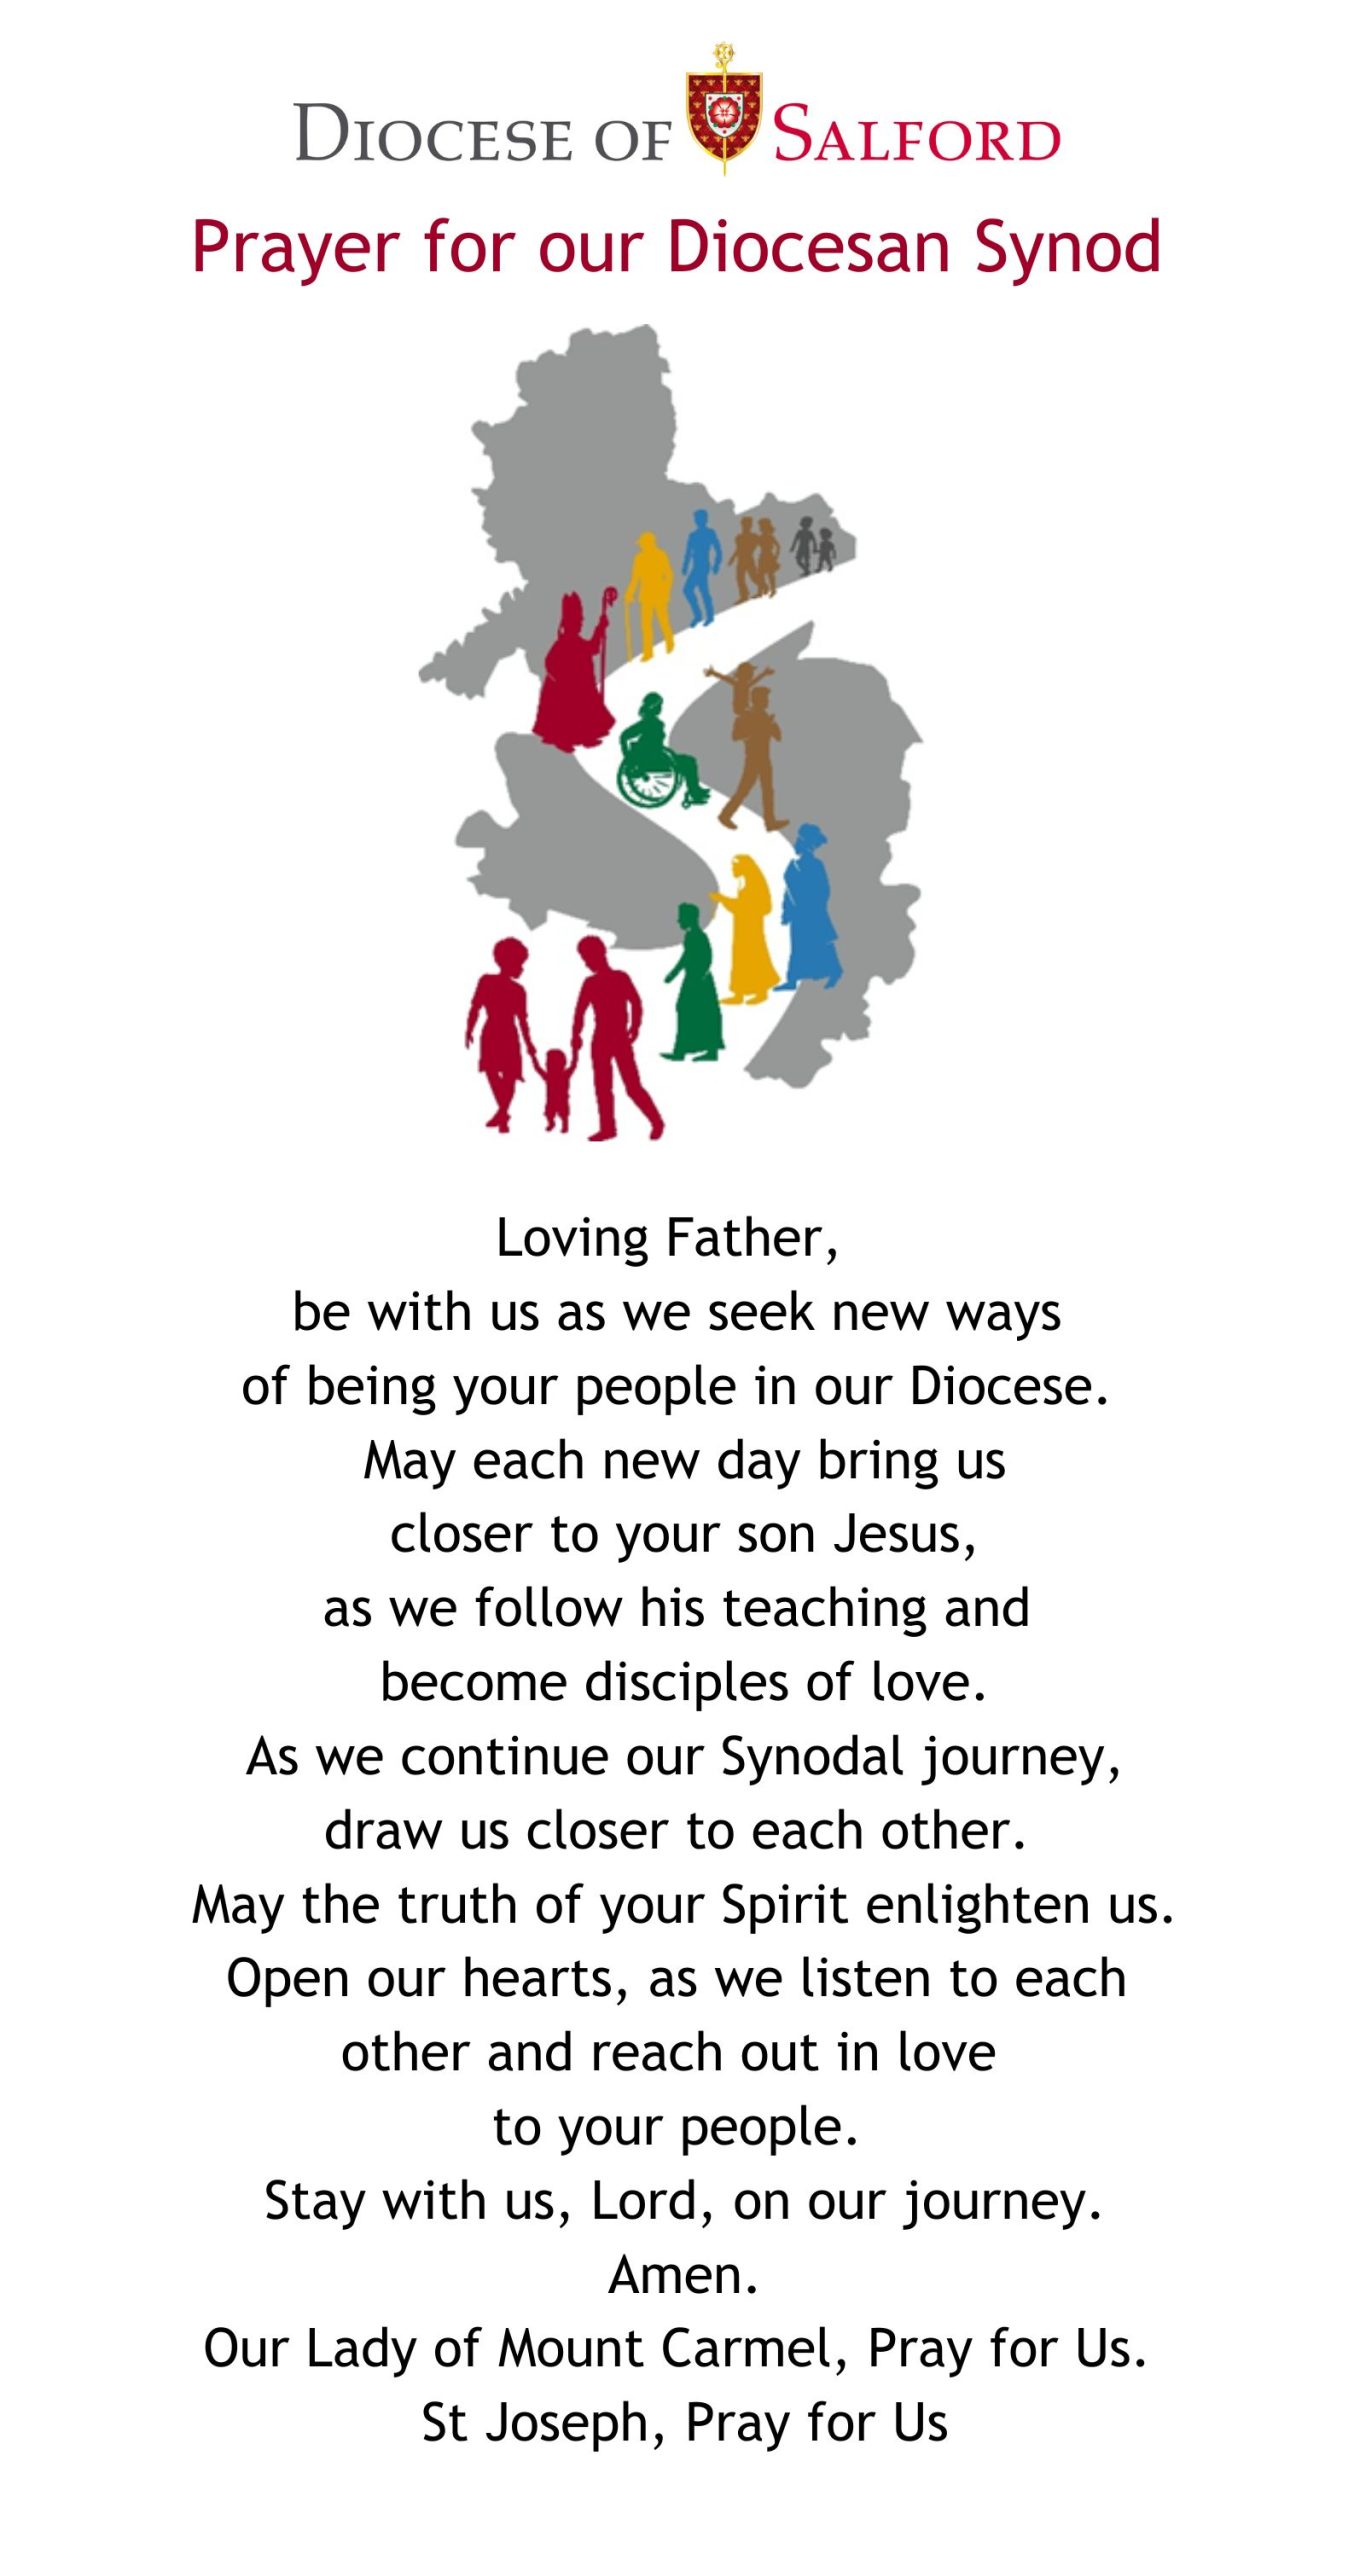 Prayer for Diocesan Synod: 
Loving Father, be with us as we seek new ways of being your people in our Diocese. 
May each new day bring us closer to your son Jesus, as we follow his teaching and become disciples of love.
As we continue our Synodal journey, draw us closer to each other.
May the truth of your Spirit enlighten us. Open our hearts, as we listen to each other and reach out in love to your people. 
Stay with us, Lord, on our journey,  Amen.
